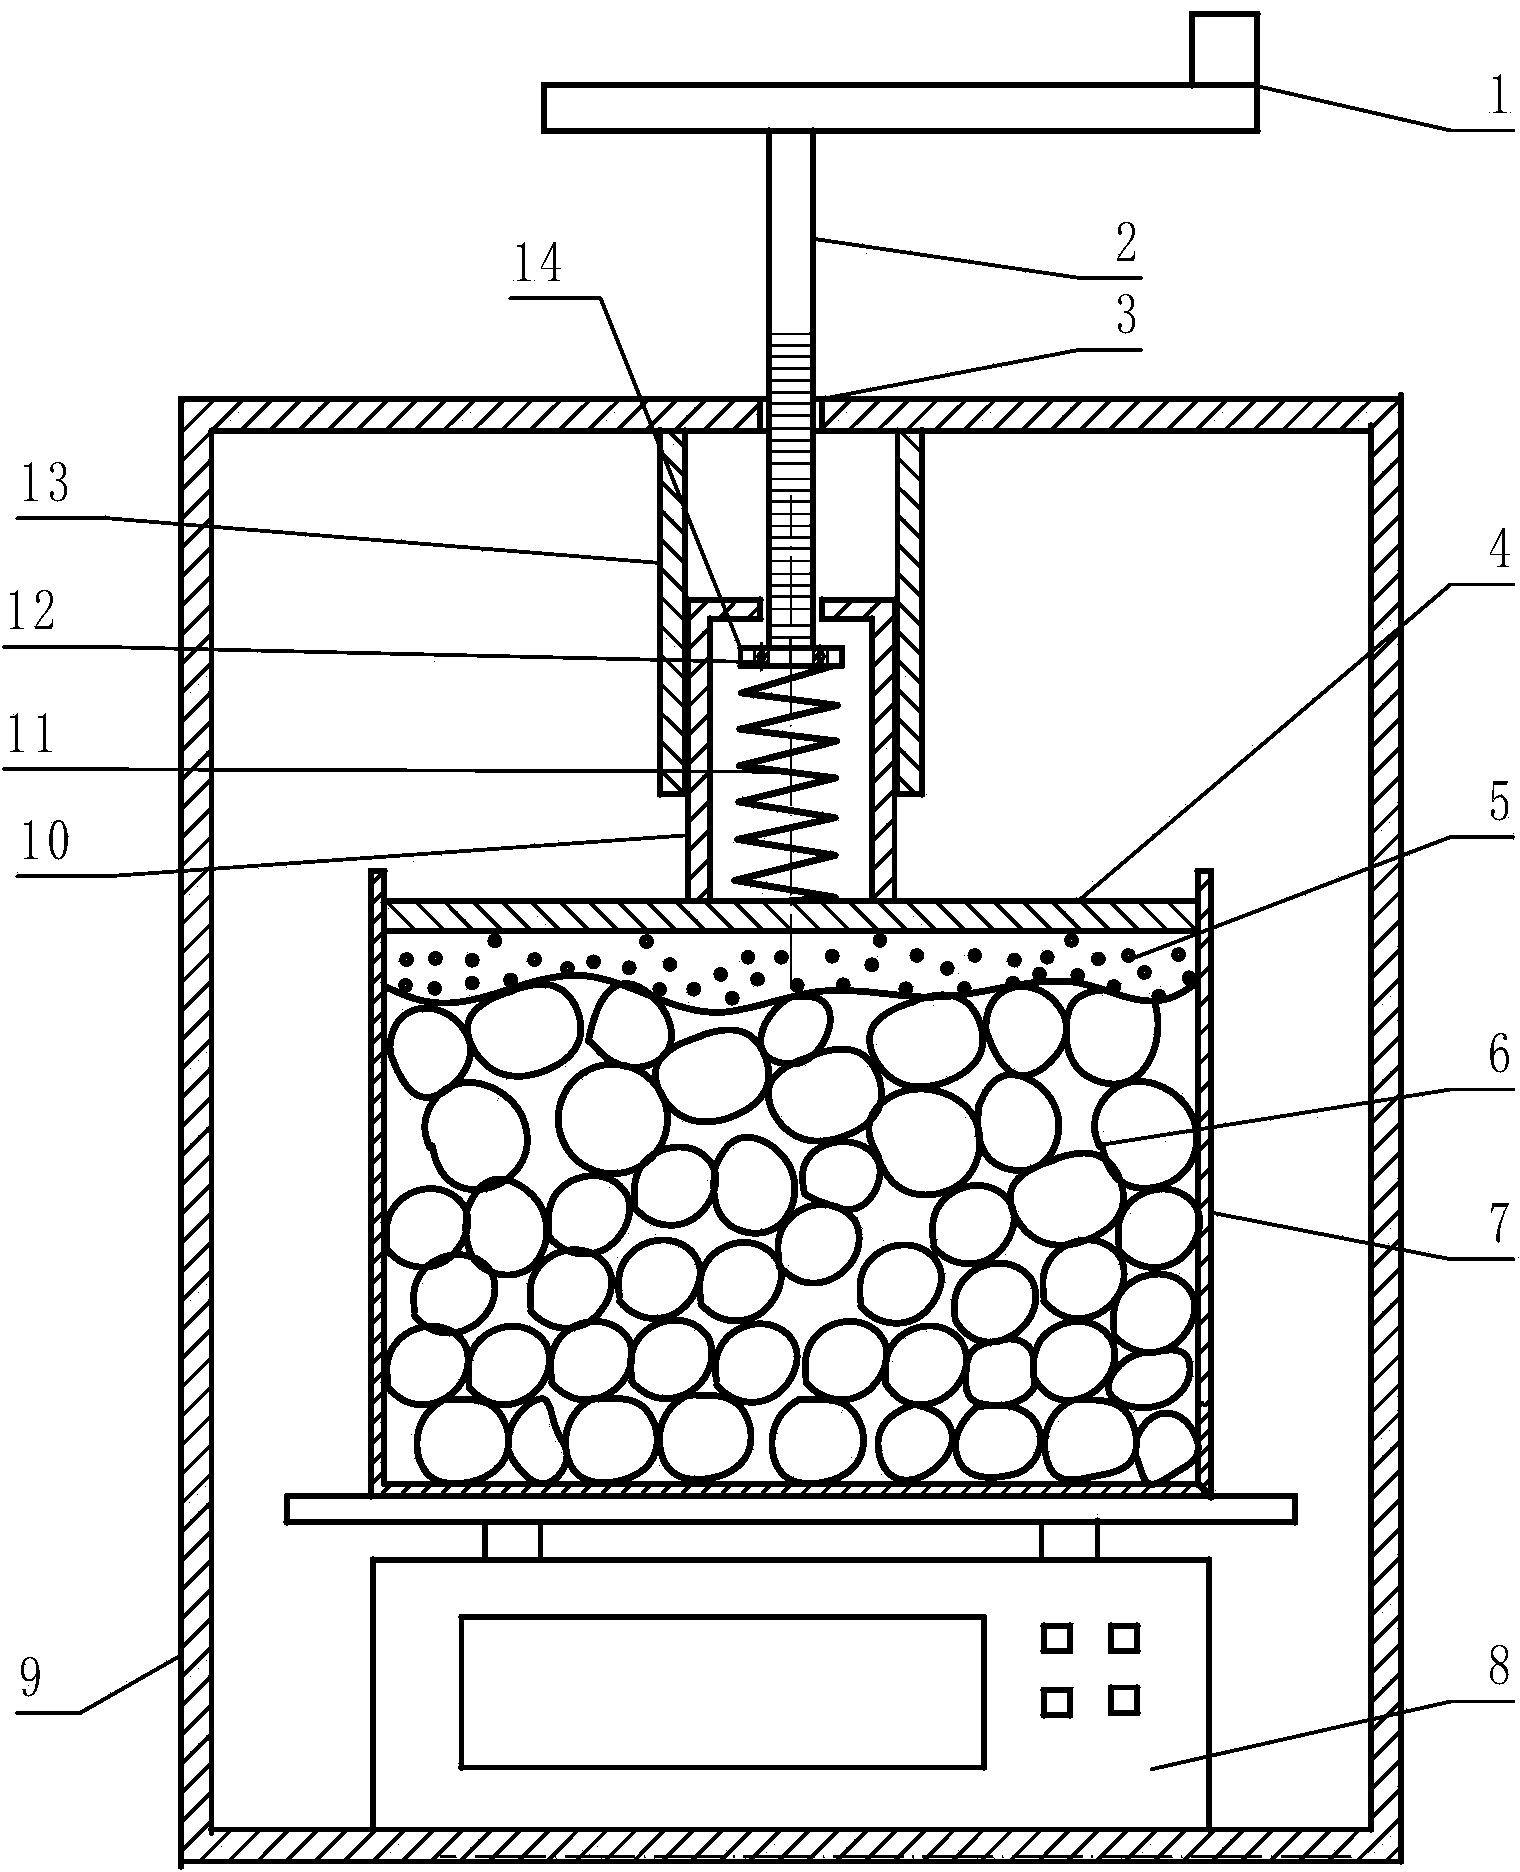 Device for measuring pressure resistance of processed tomatoes